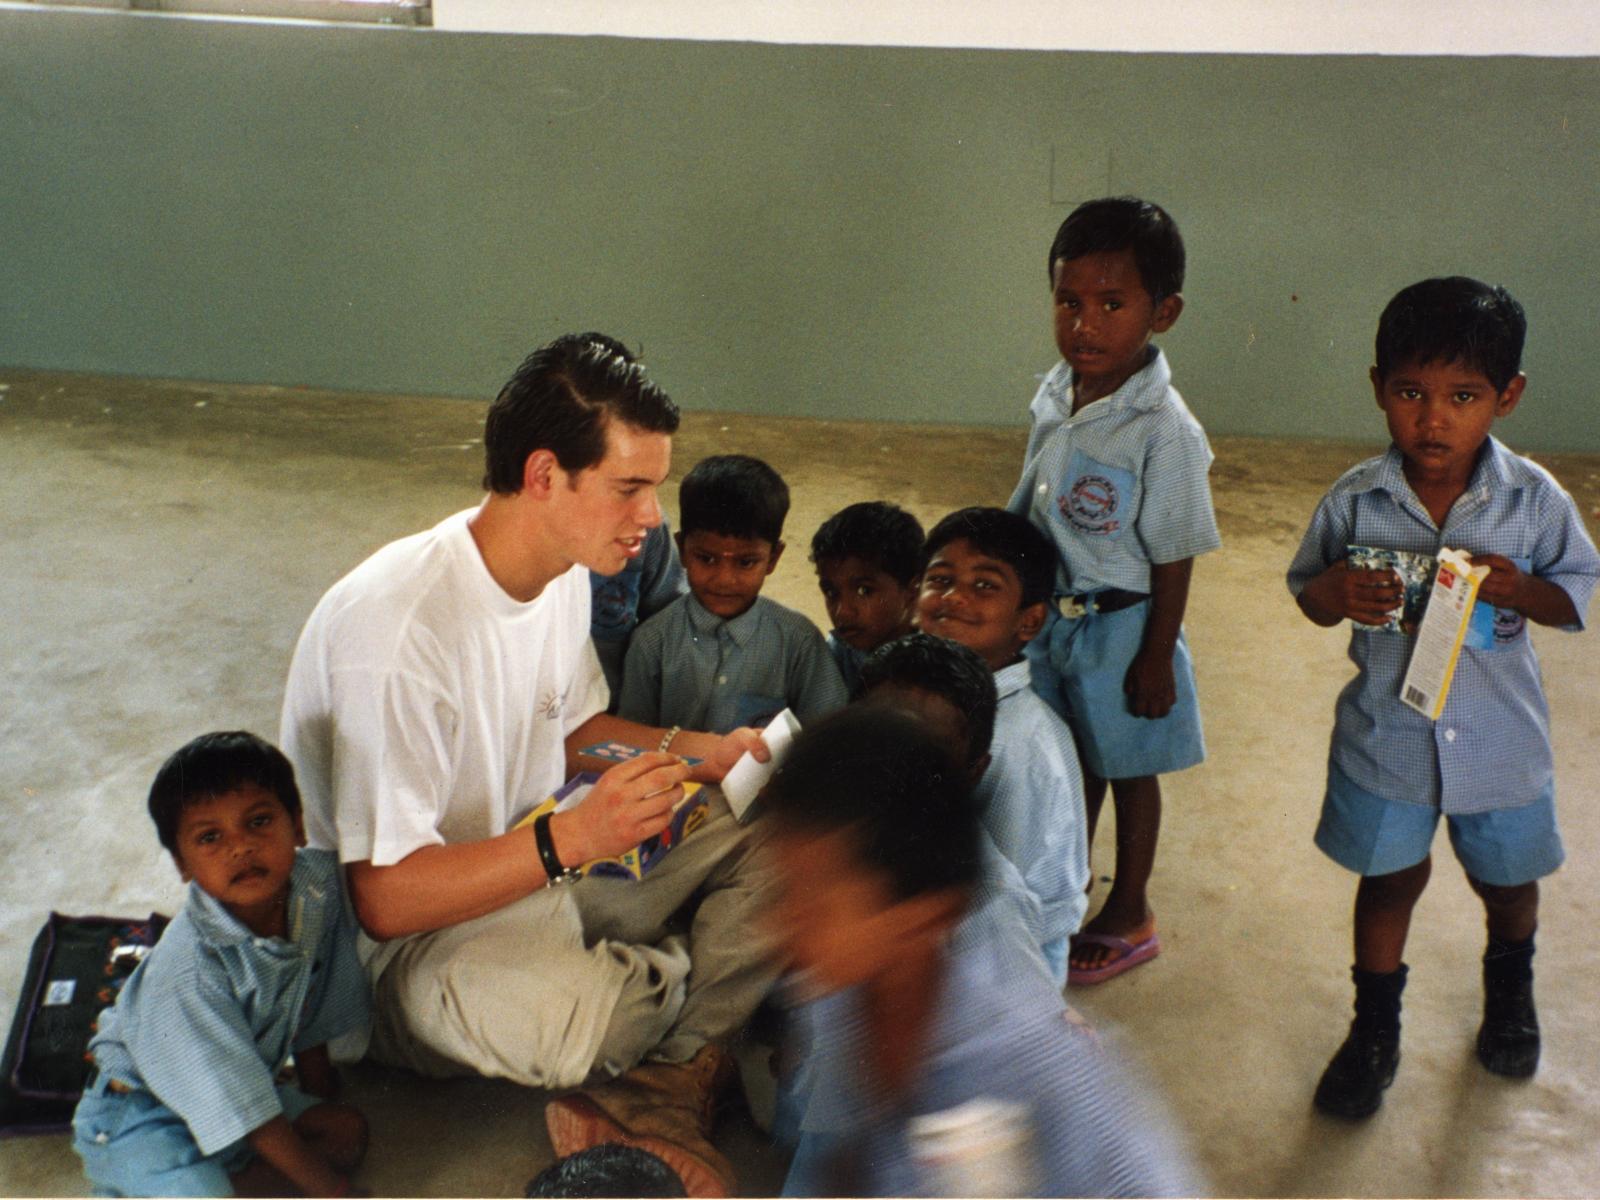 Prince Félix on a humanitarian mission in 2002